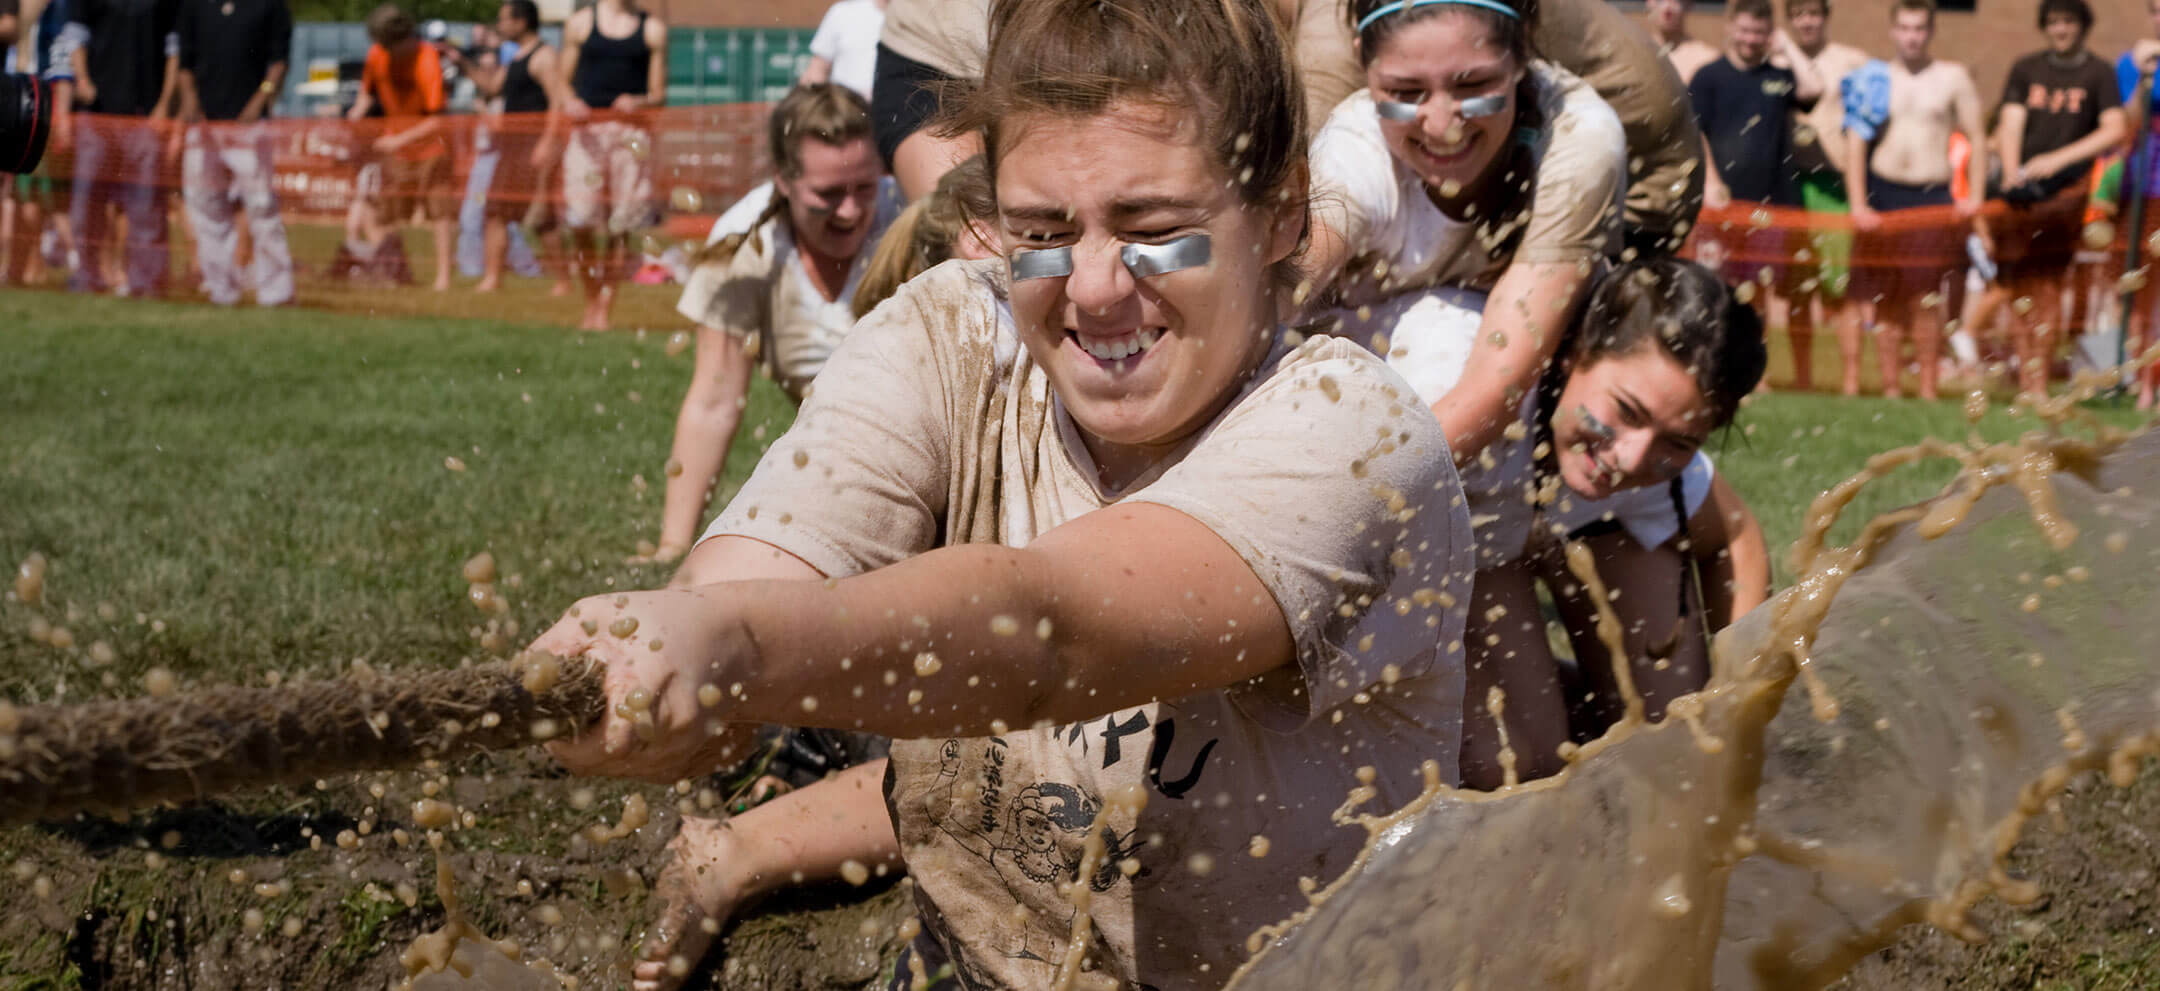 An team being pulled into the mud at mudtug